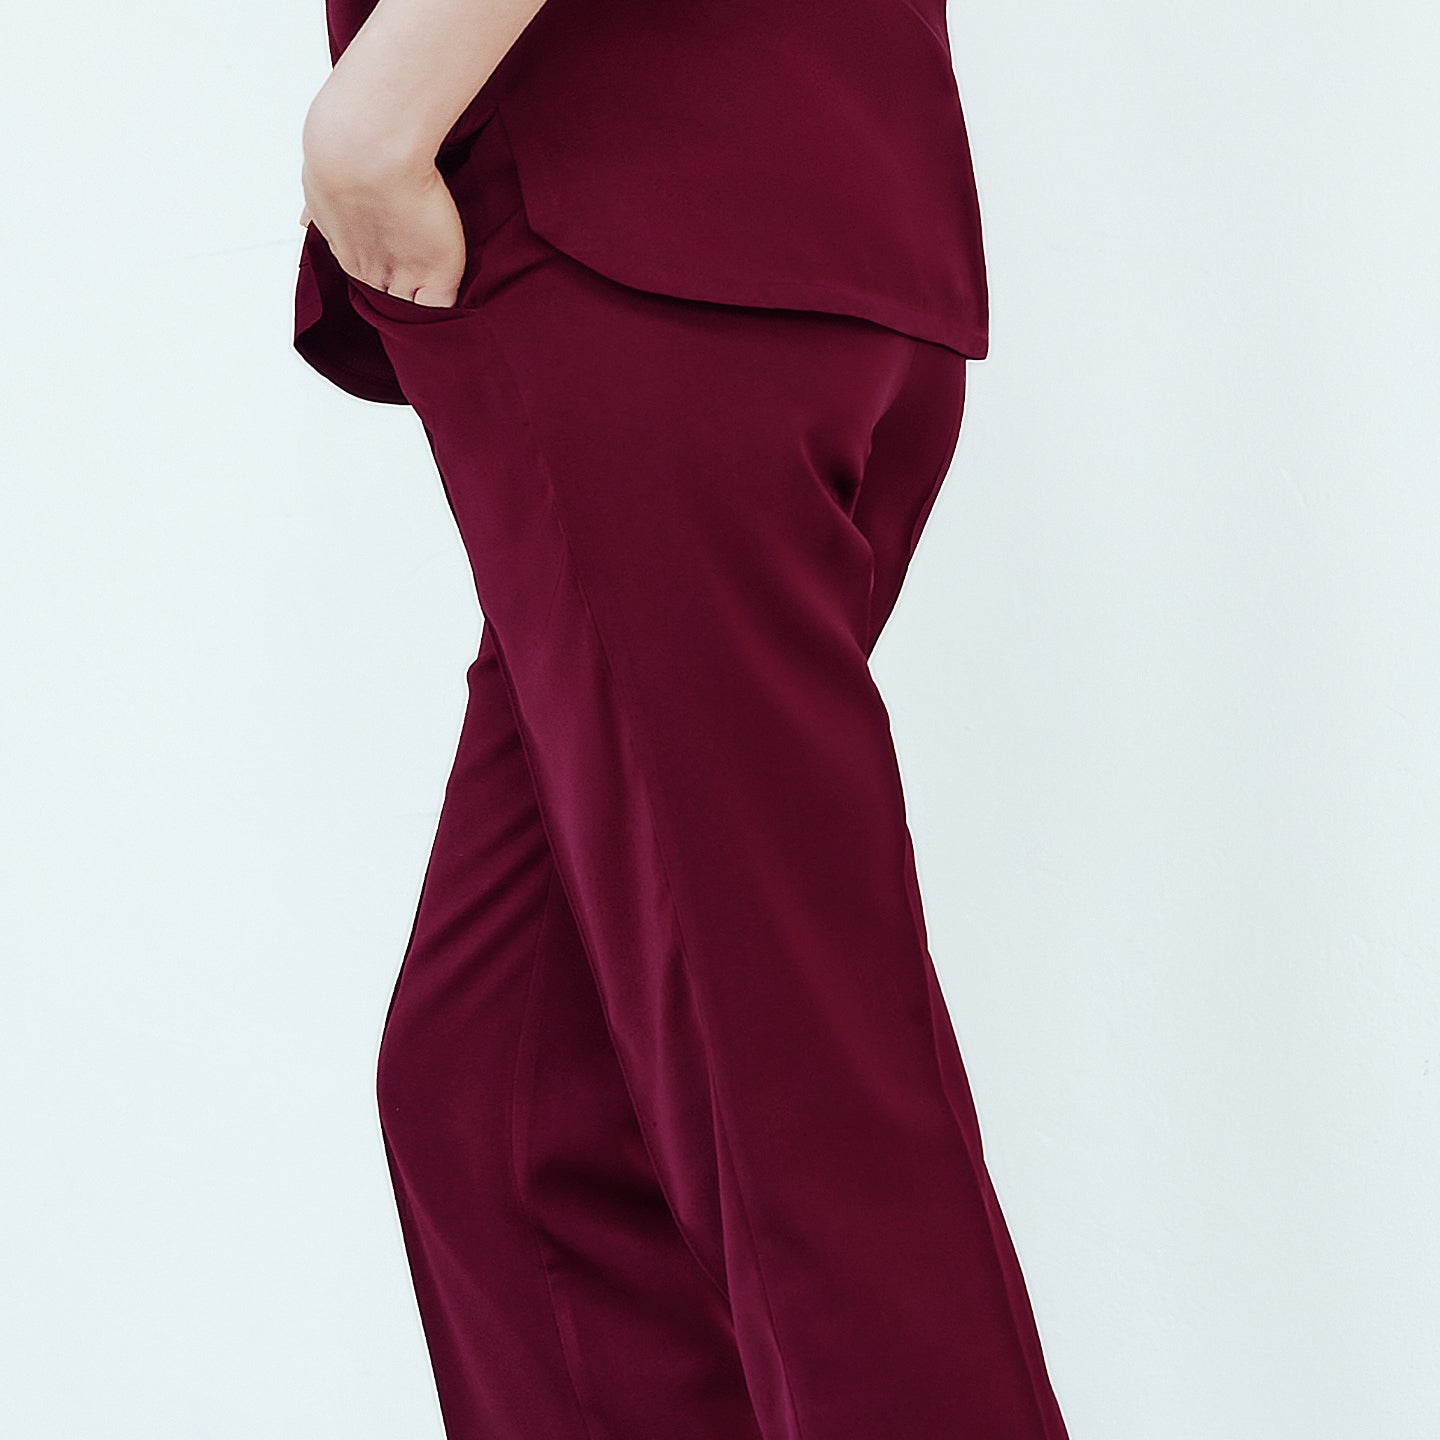  Burgundy Line Banding Scrub Pants, back view, showcasing the side pocket detail and smooth fabric finish, paired with a matching top,Burgundy